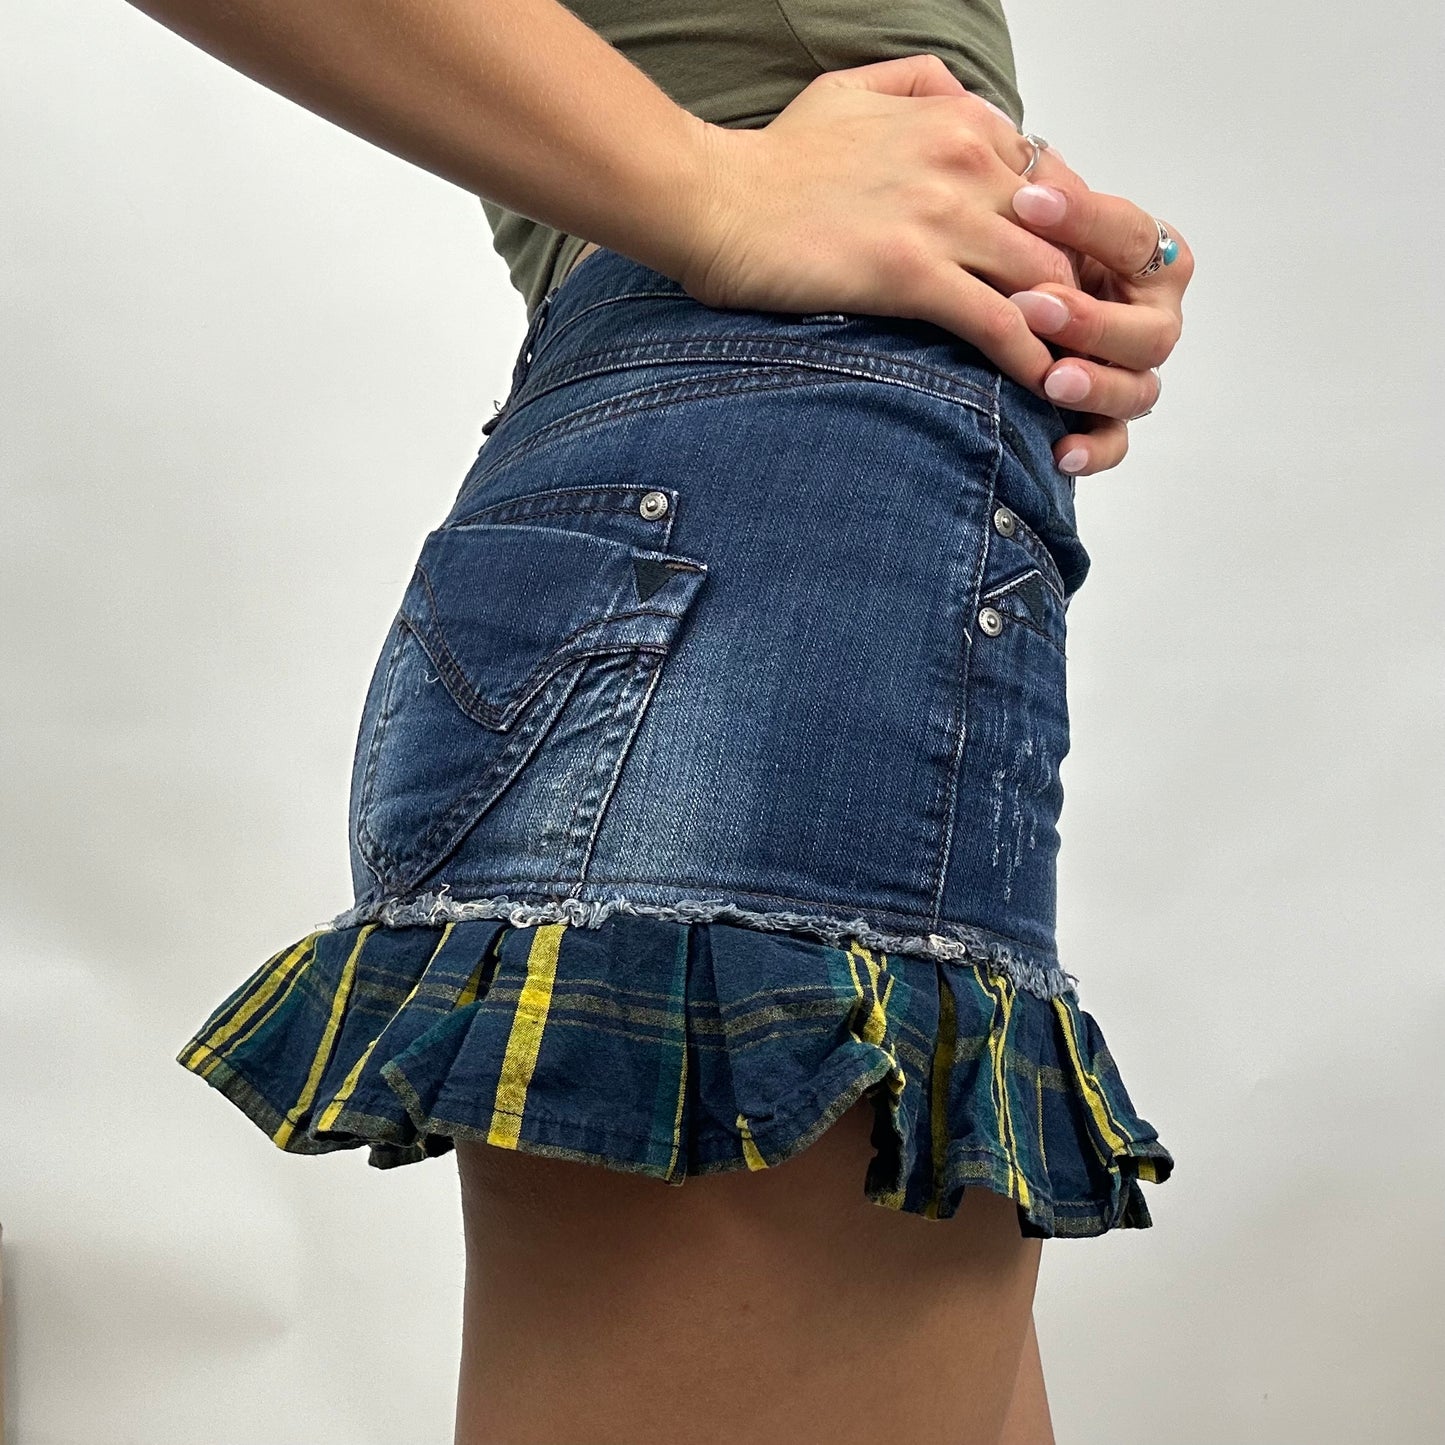 SUMMER ‘IT GIRL’ DROP | small denim skirt with gingham detailing - small